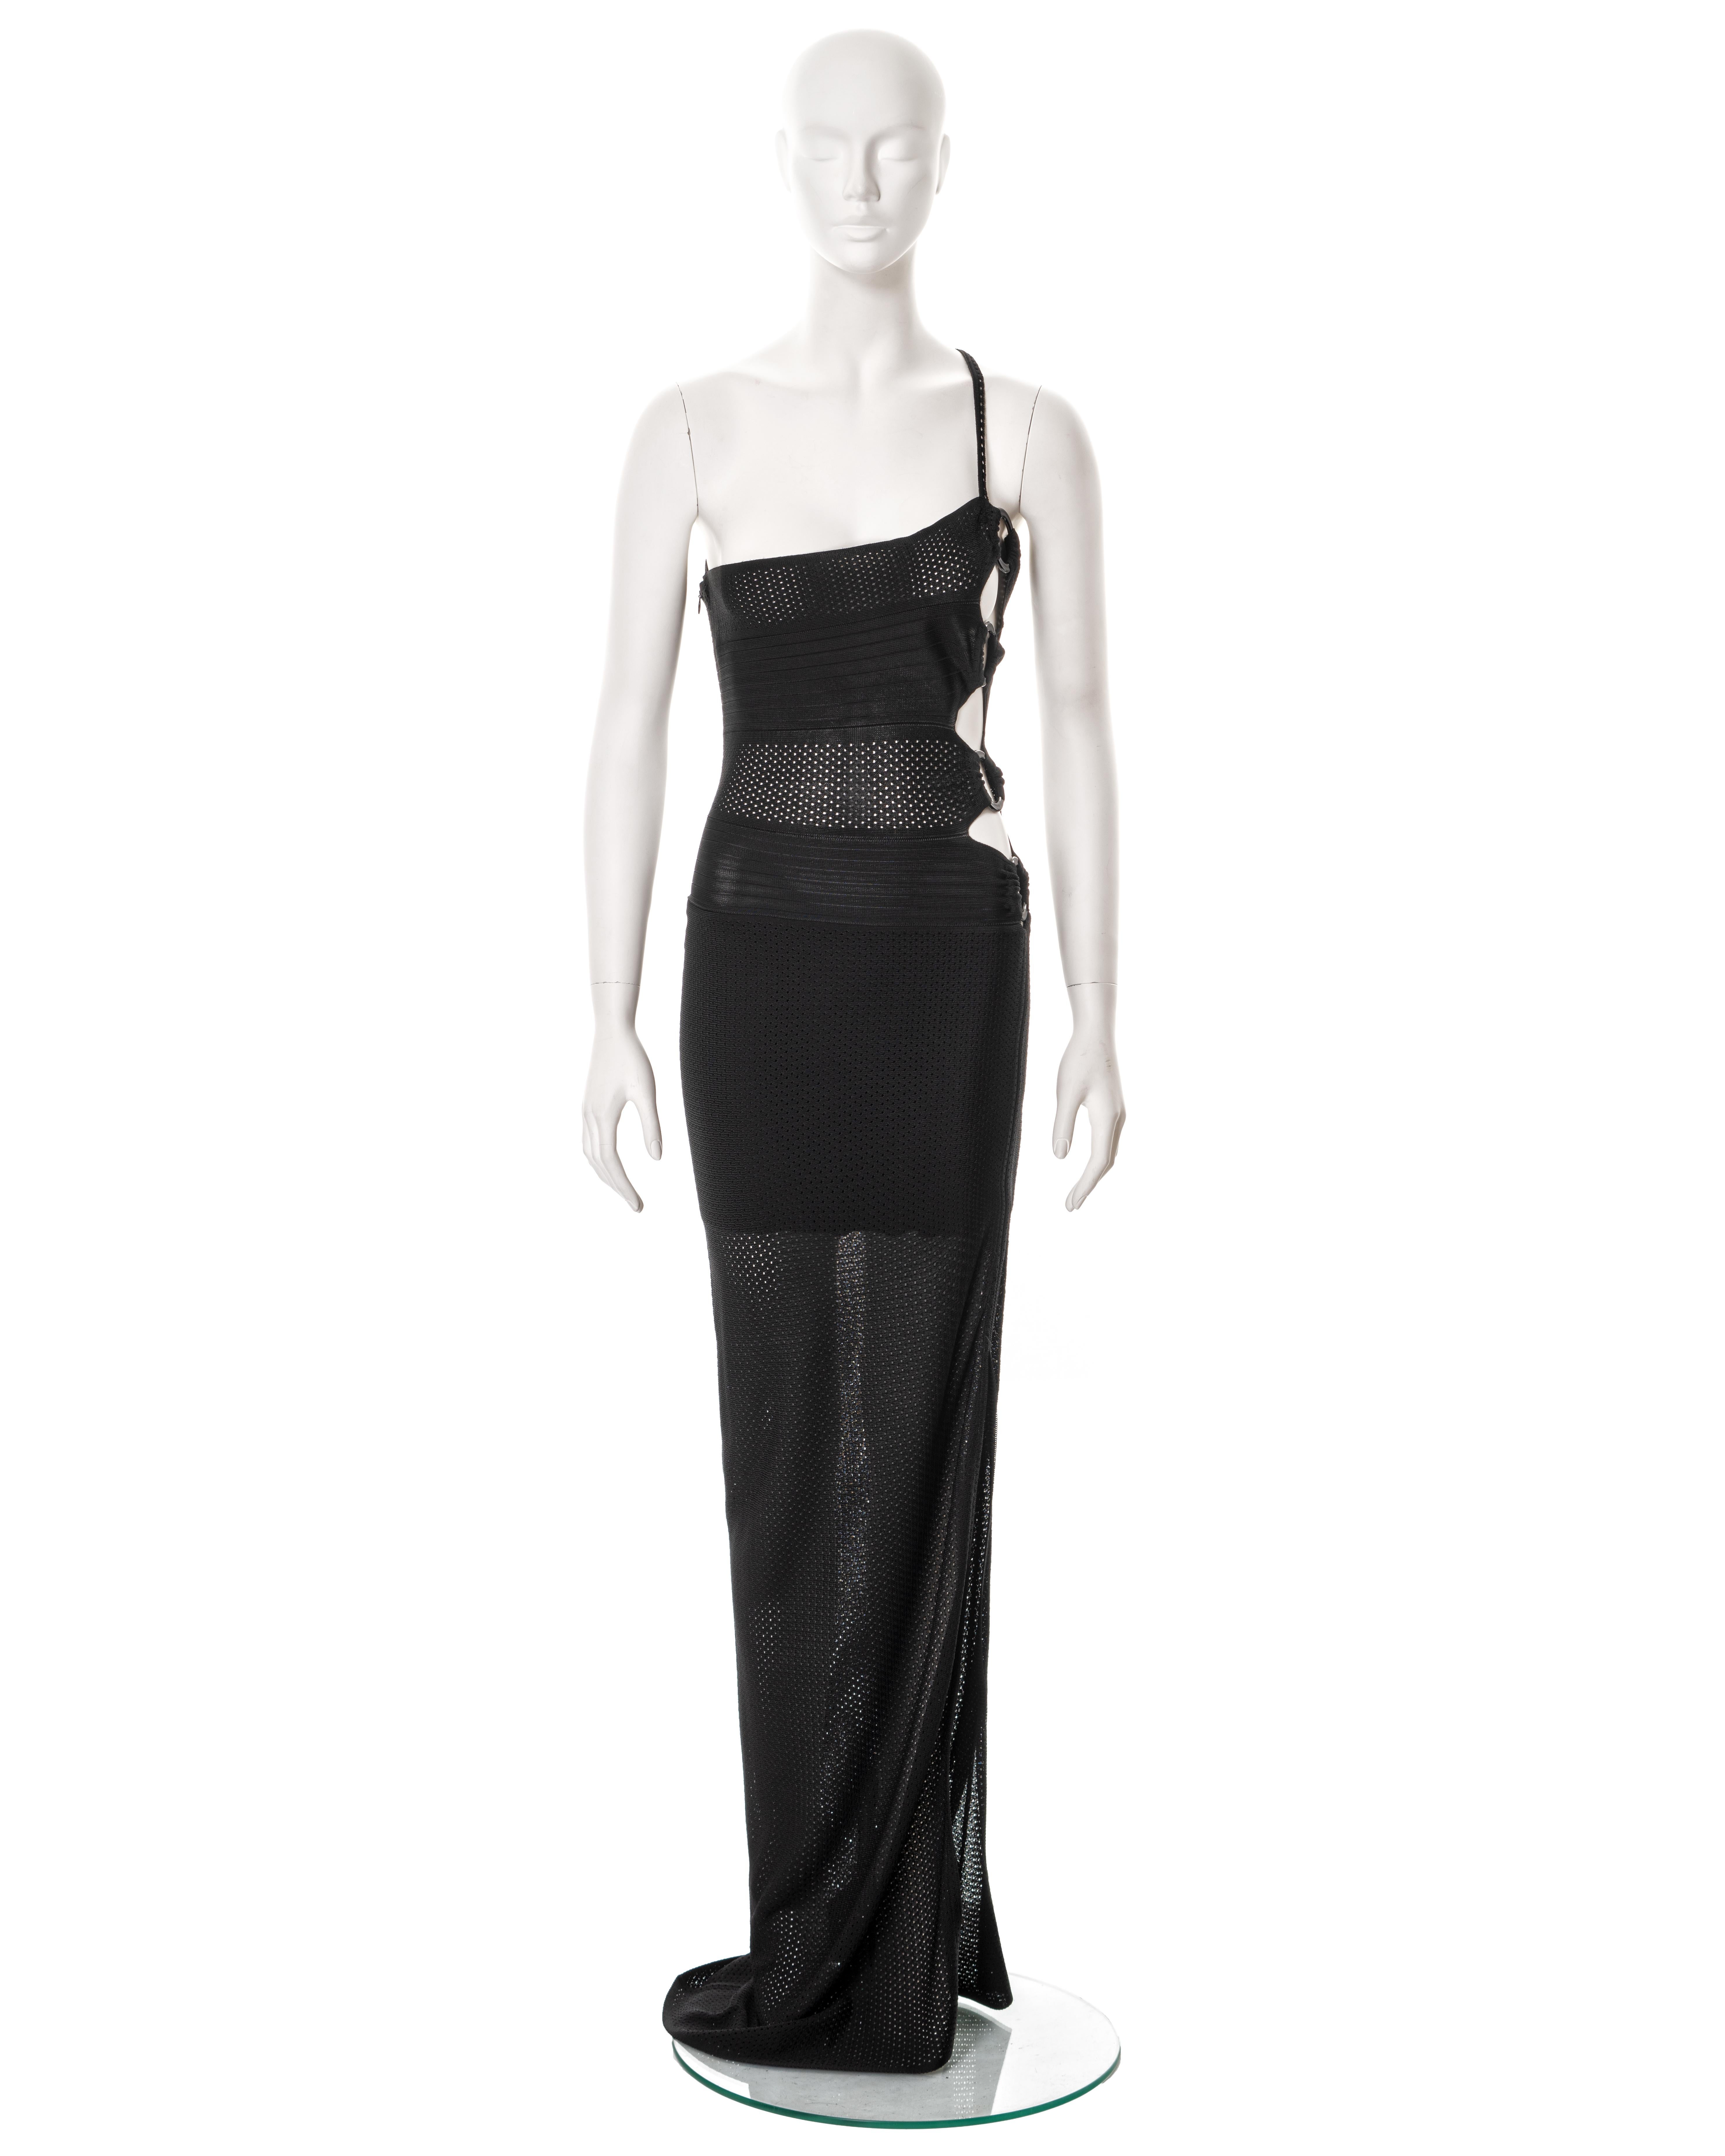 ▪ Christian Dior evening dress
▪ Creative Director: John Galliano
▪ Spring-Summer 2002 
▪ Constructed from black perforated viscose 
▪ Asymmetric neckline with single shoulder strap
▪ Cut outs to one side of the bodice with four large plastic rings